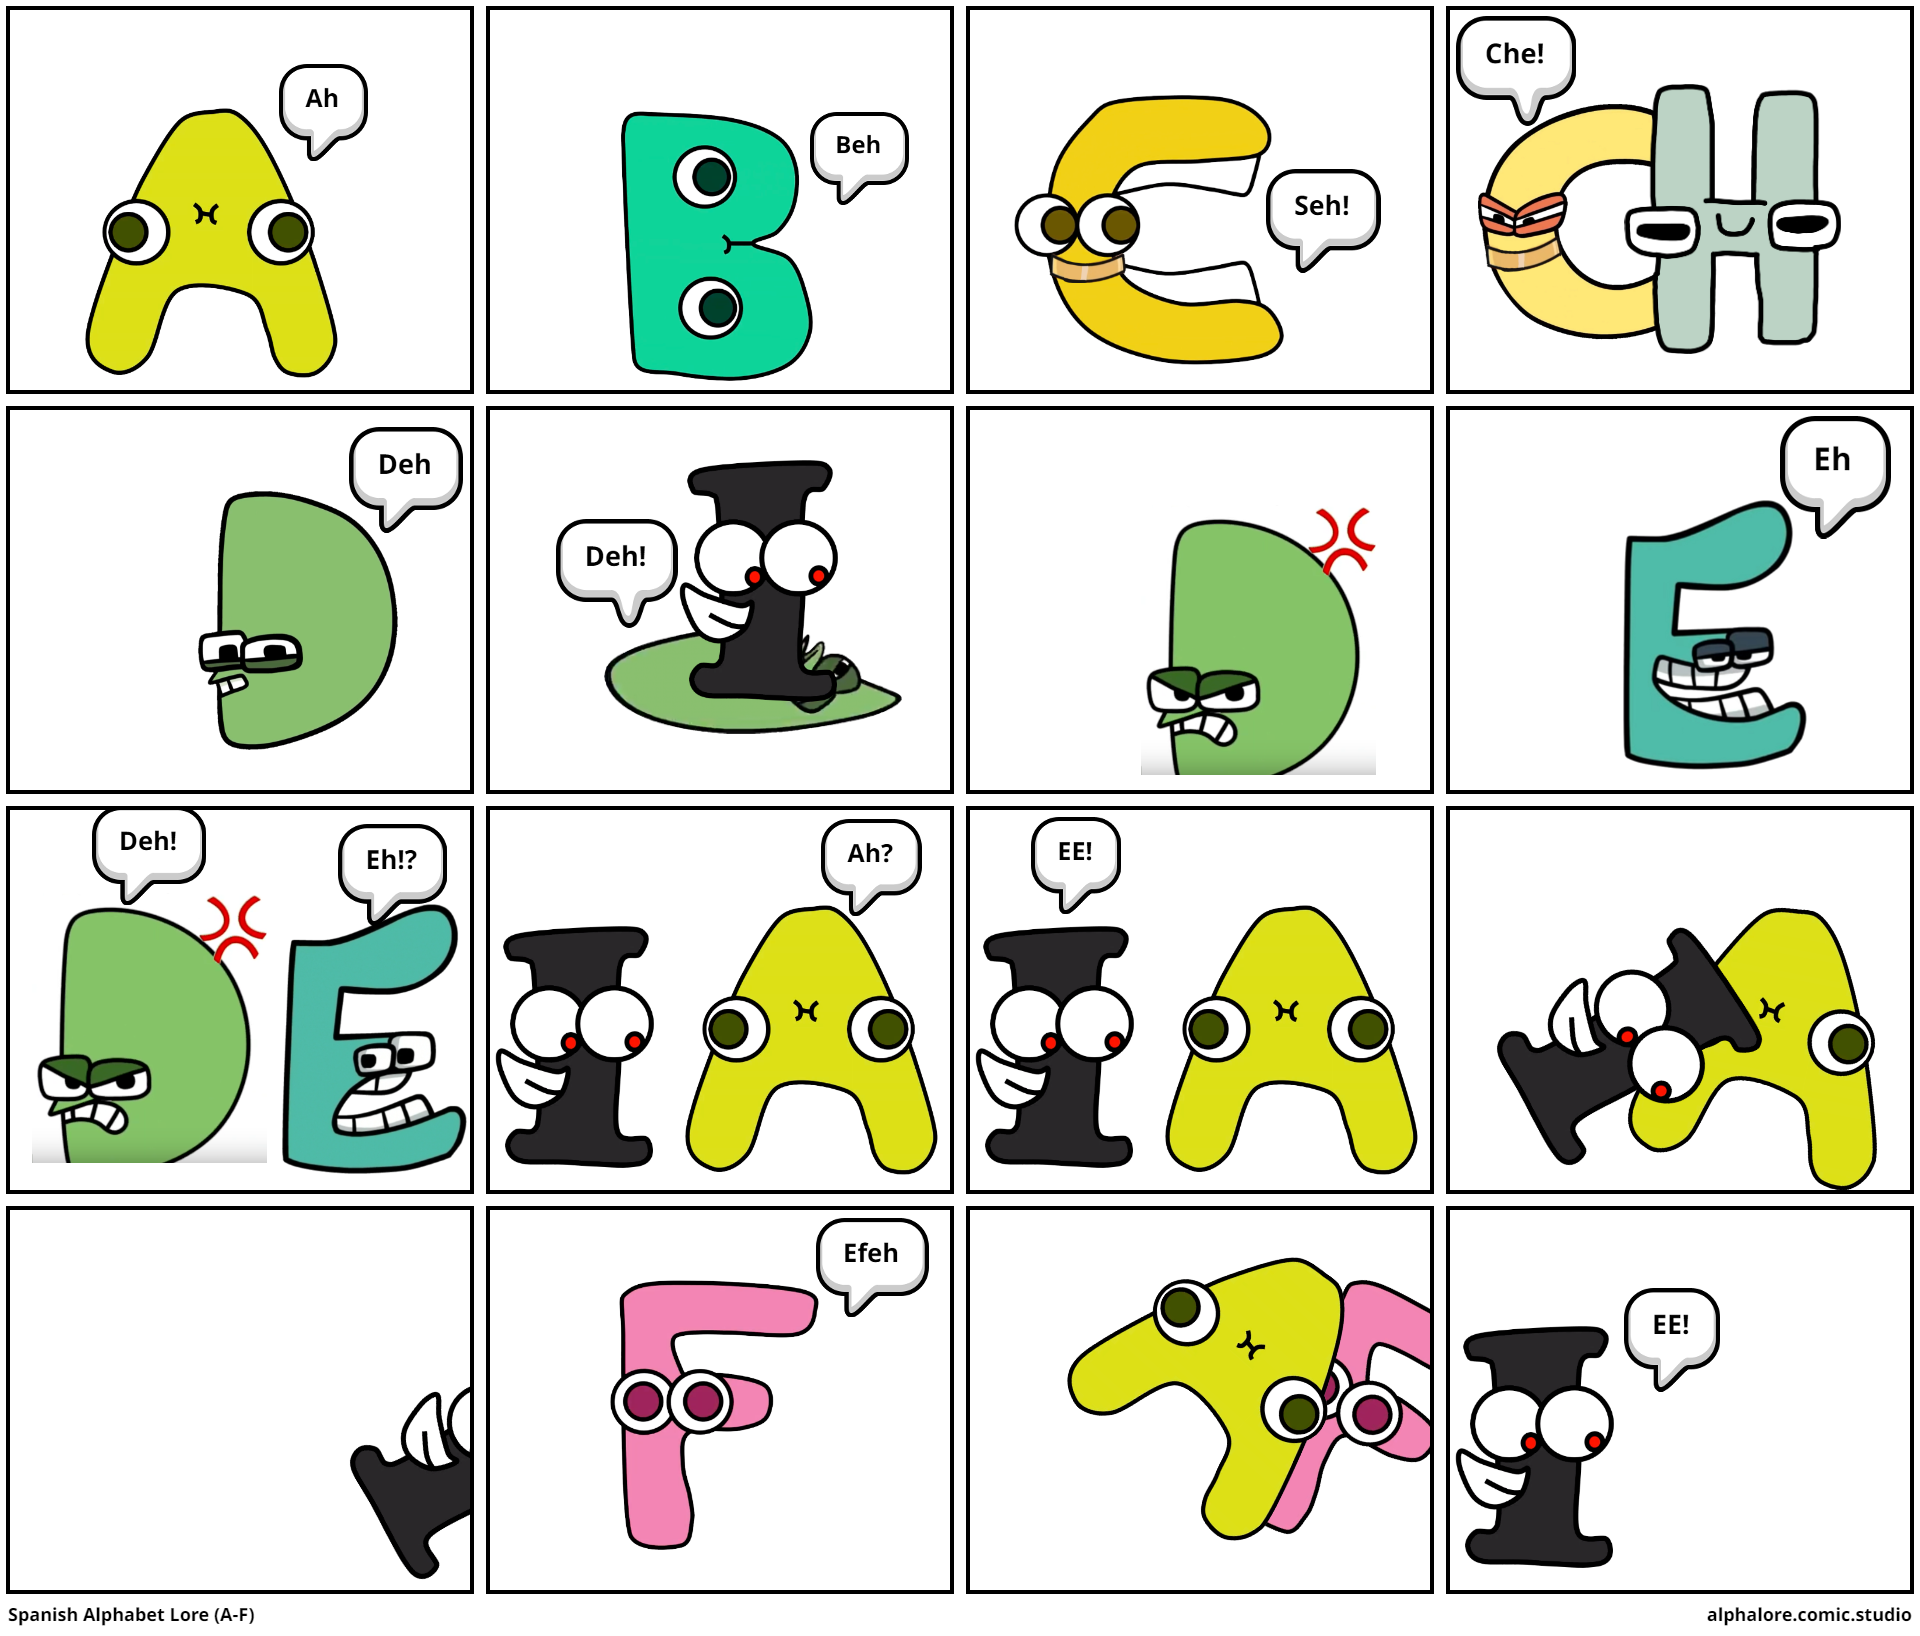 Spanish Alphabet Lore With CH, LL, And RR. - Comic Studio